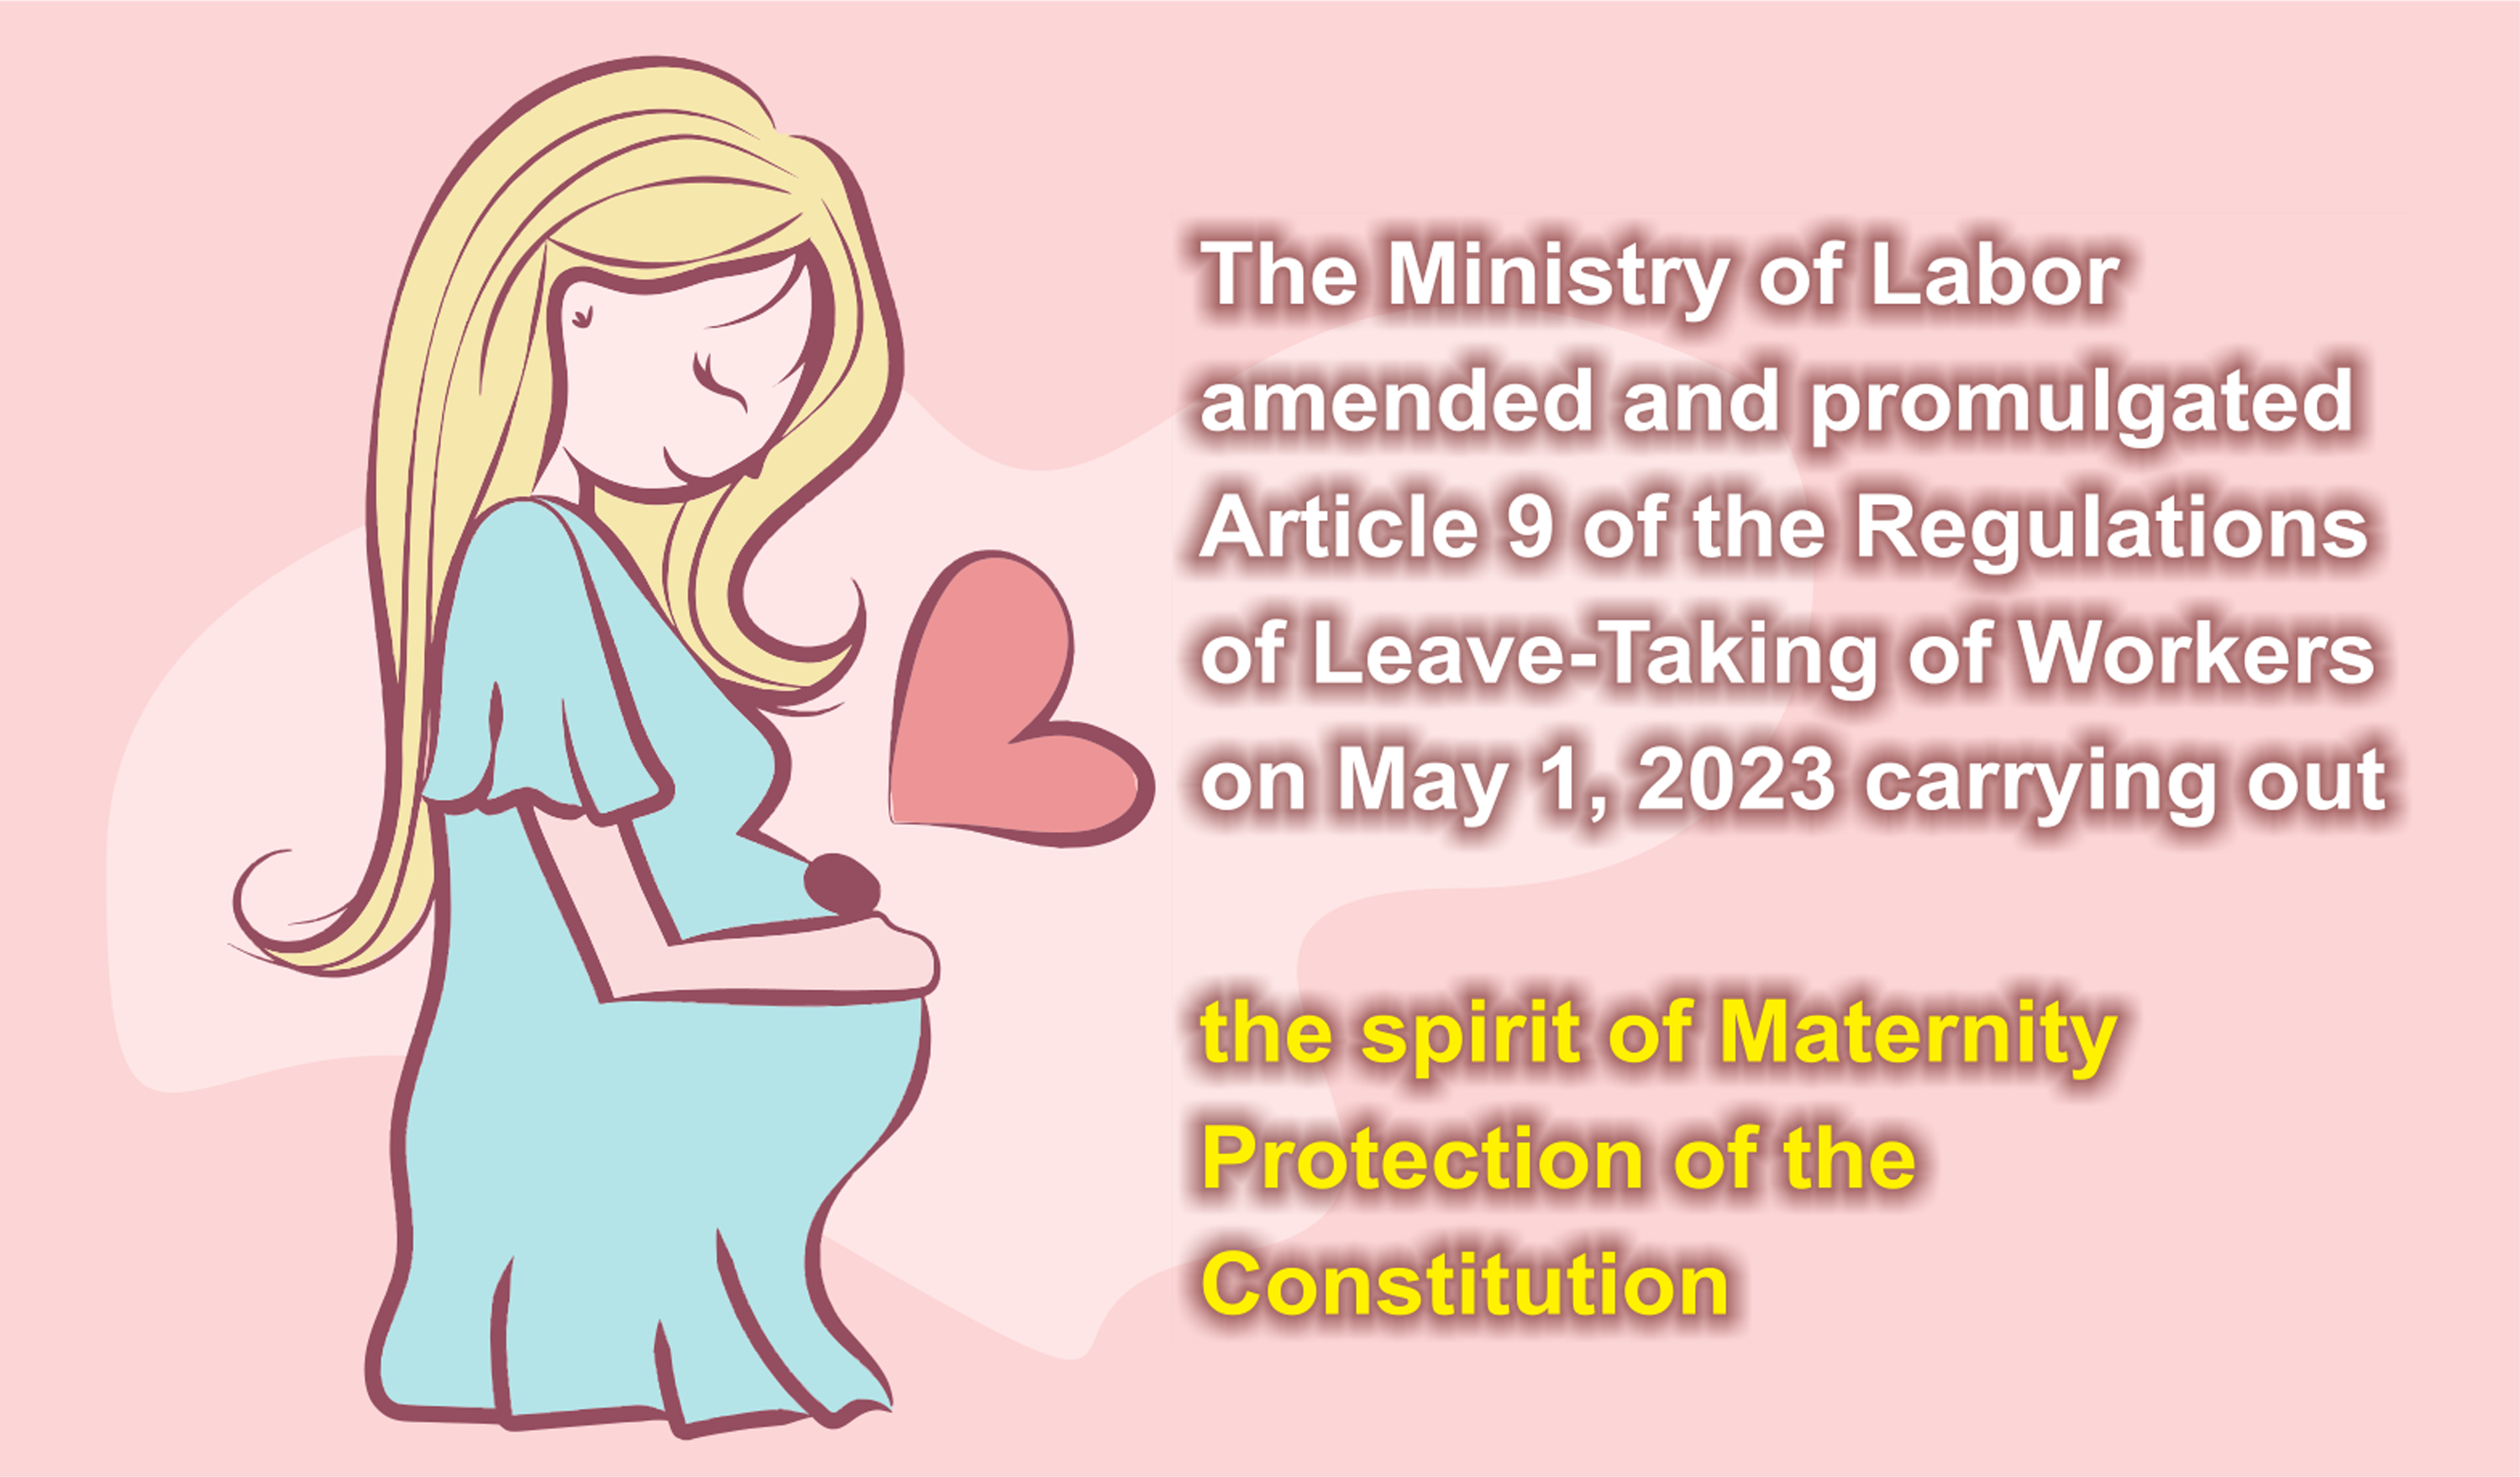 The Ministry of Labor Amends Article 9 of the Regulations of Leave-Taking of Workers to Further Guarantee the Rights of Female Workers